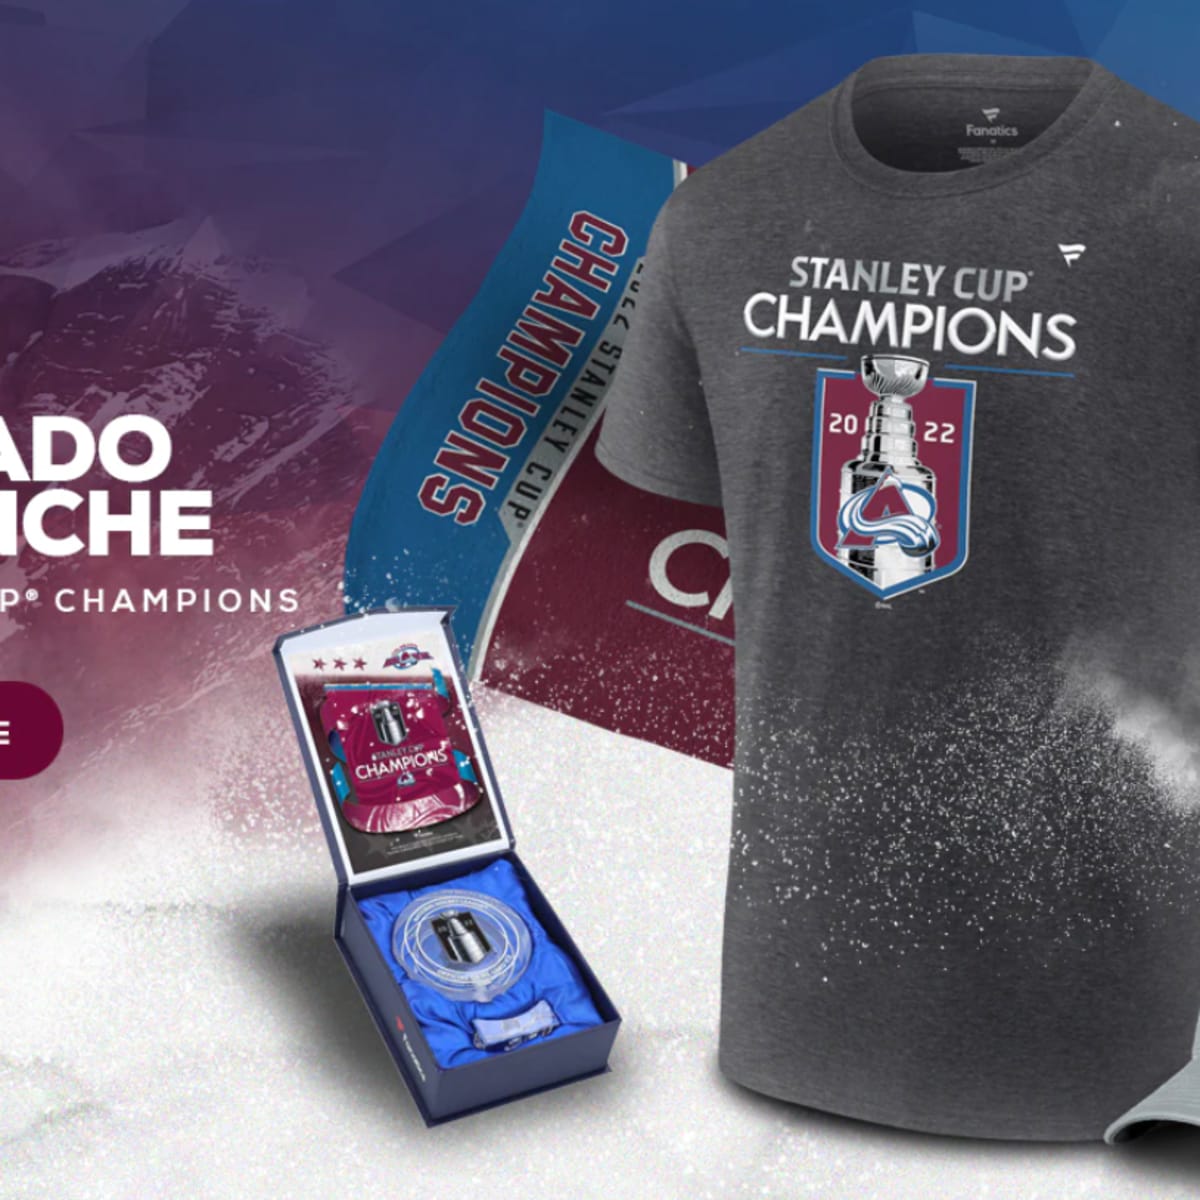 Fanatics - The Colorado Avalanche are #StanleyCup Champions